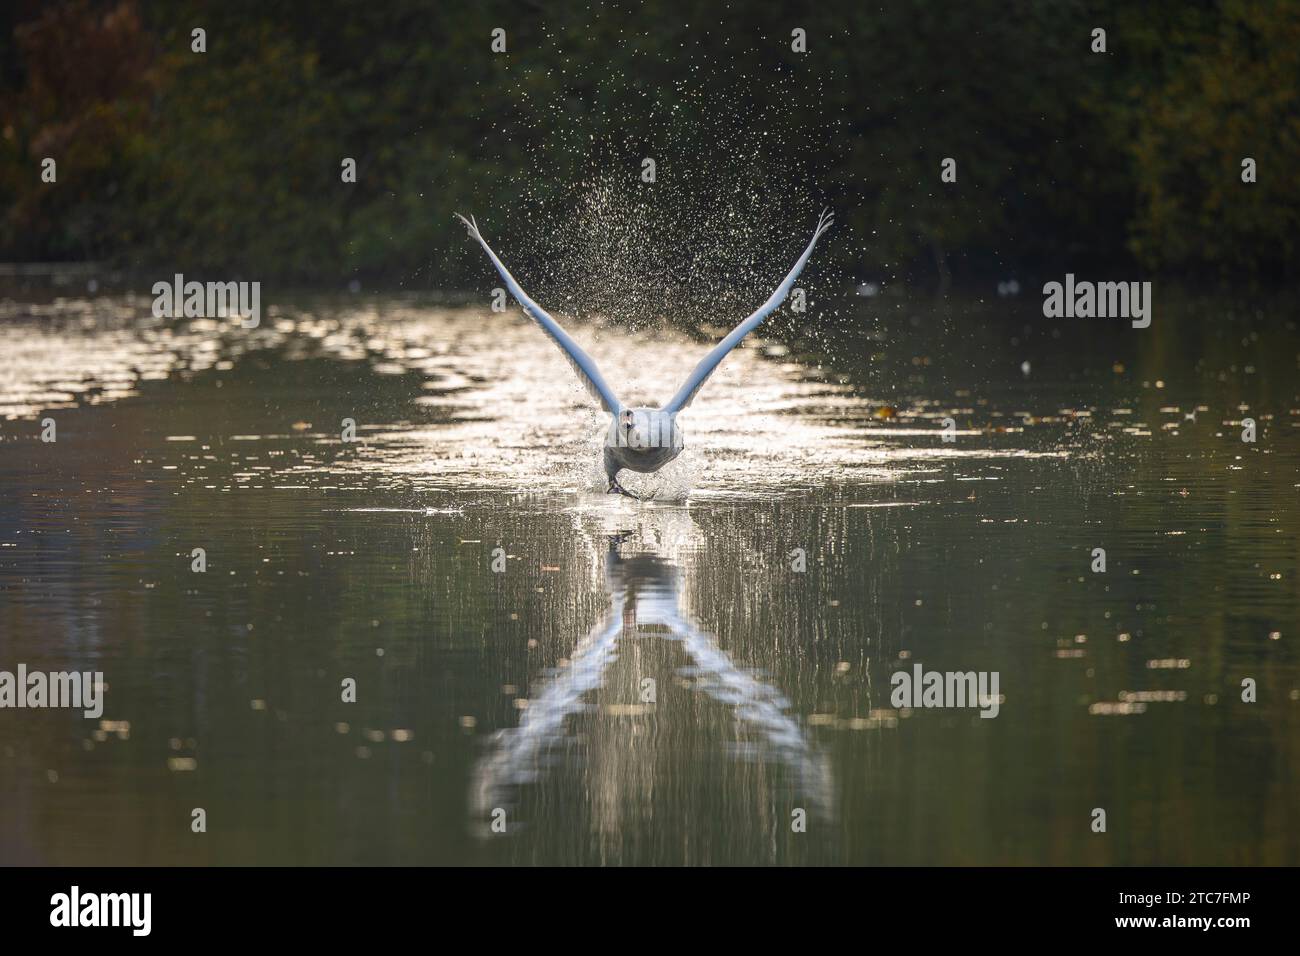 Close up front view of a mute swan lifting off in flight towards the viewer over a pool of water. Stock Photo